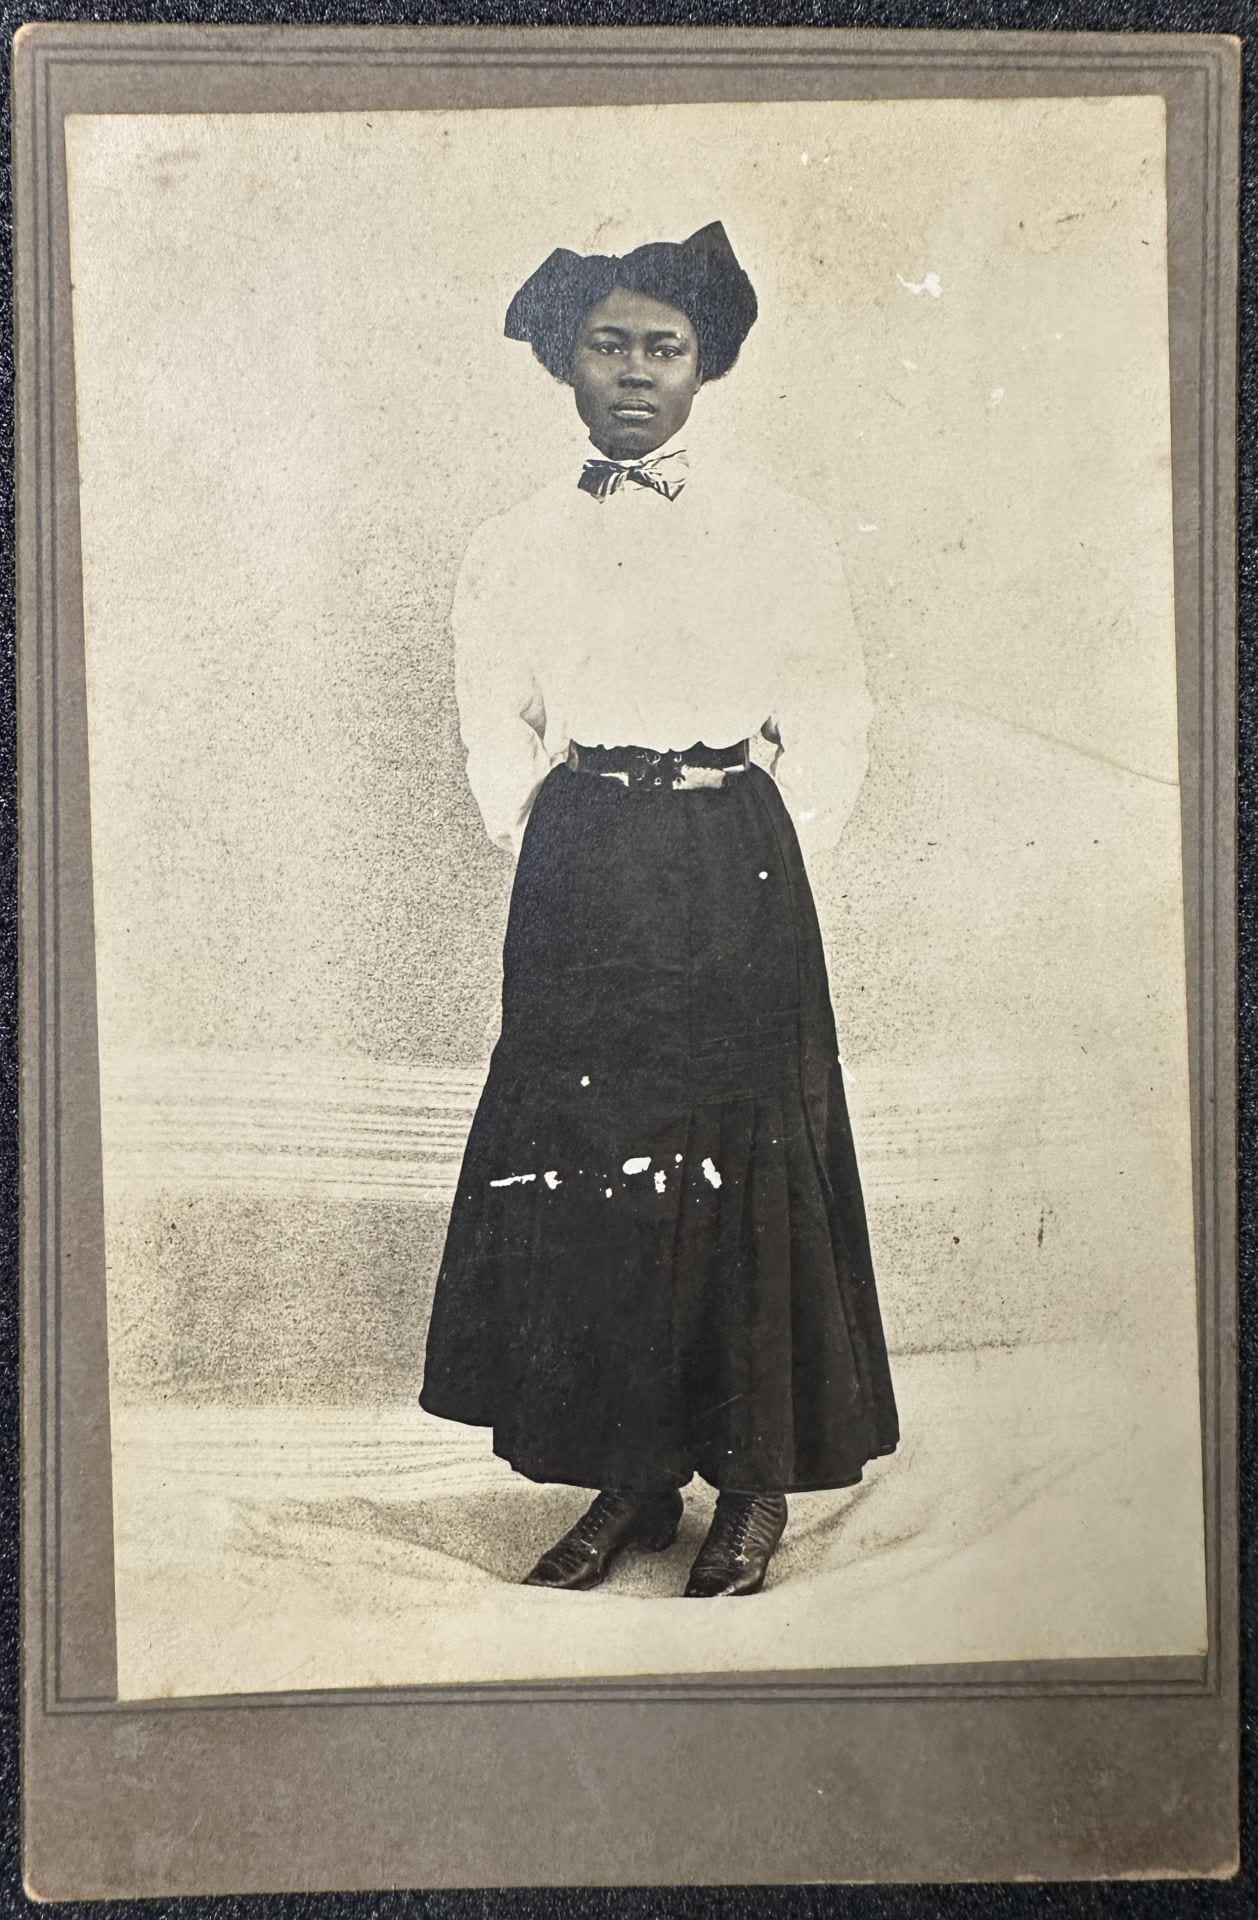 Portrait of a standing Black woman wearing a white shirt and long dark trouser skirt.